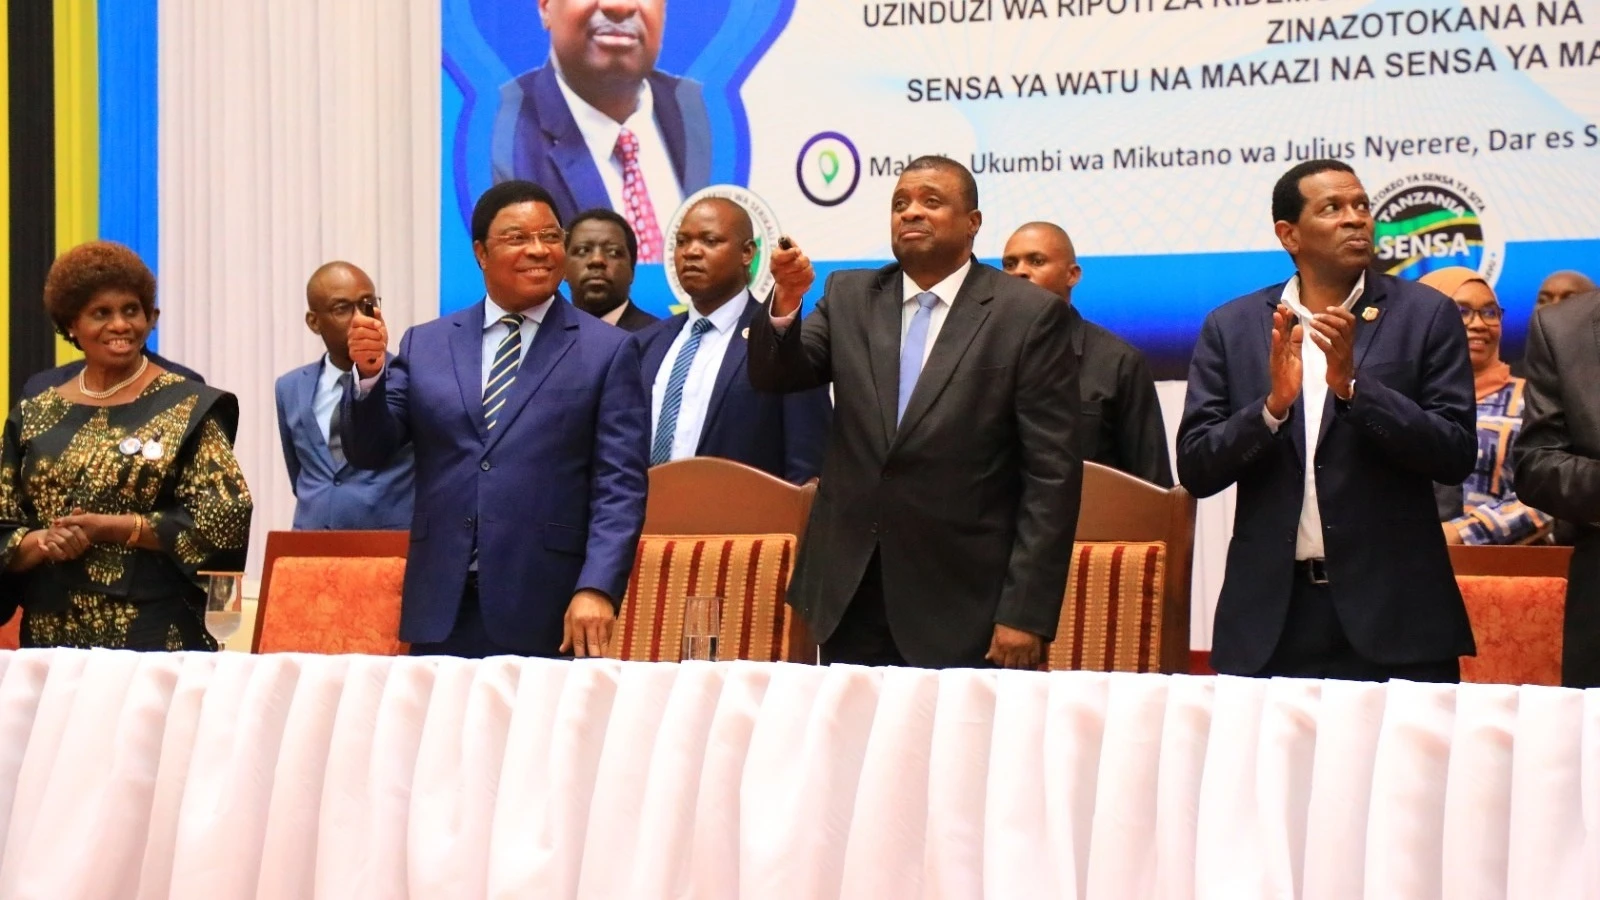 Prime Minister Kassim Majaliwa and Zanzibar Second Vice President Hemed Suleiman Abdullah (2nd-R) pictured in Dar es Salaam on Saturday pressing remote controls to launch the 2022 Demographic, Social, Economic and Environment Reports.